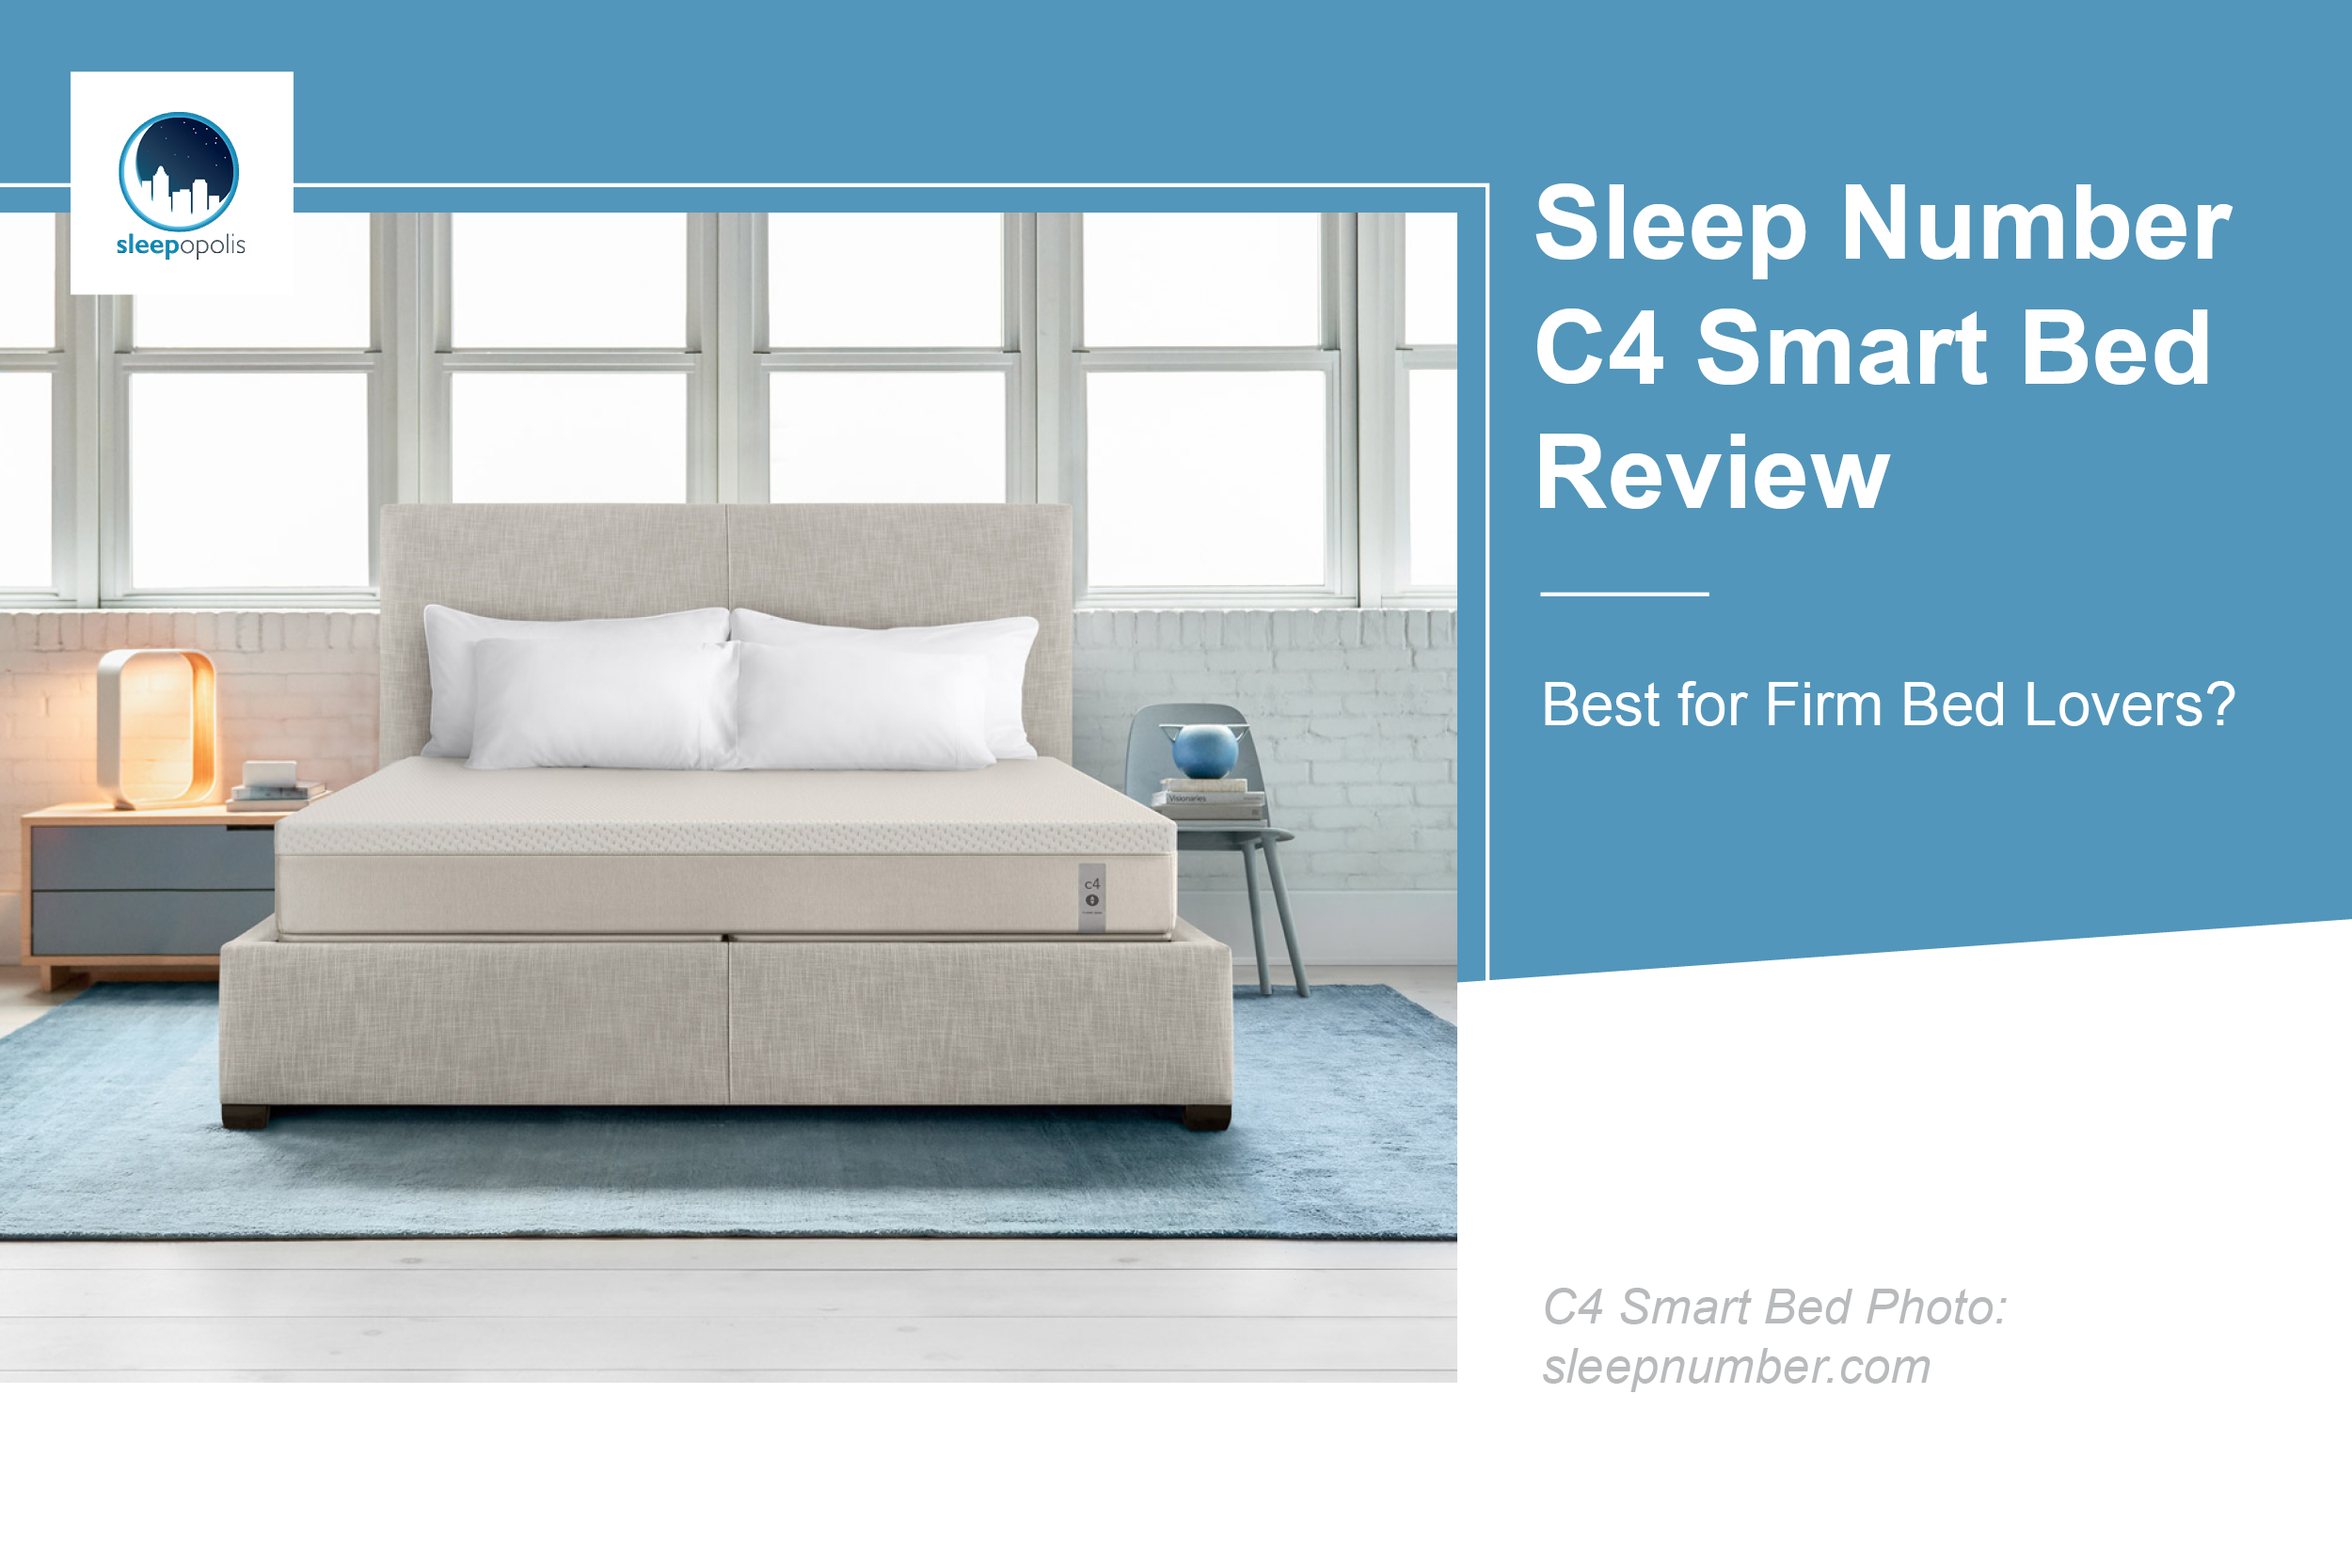 Sleep Number 360 C4 Smart Bed Review, Flex Top King Sheets For Sleep Number Bed